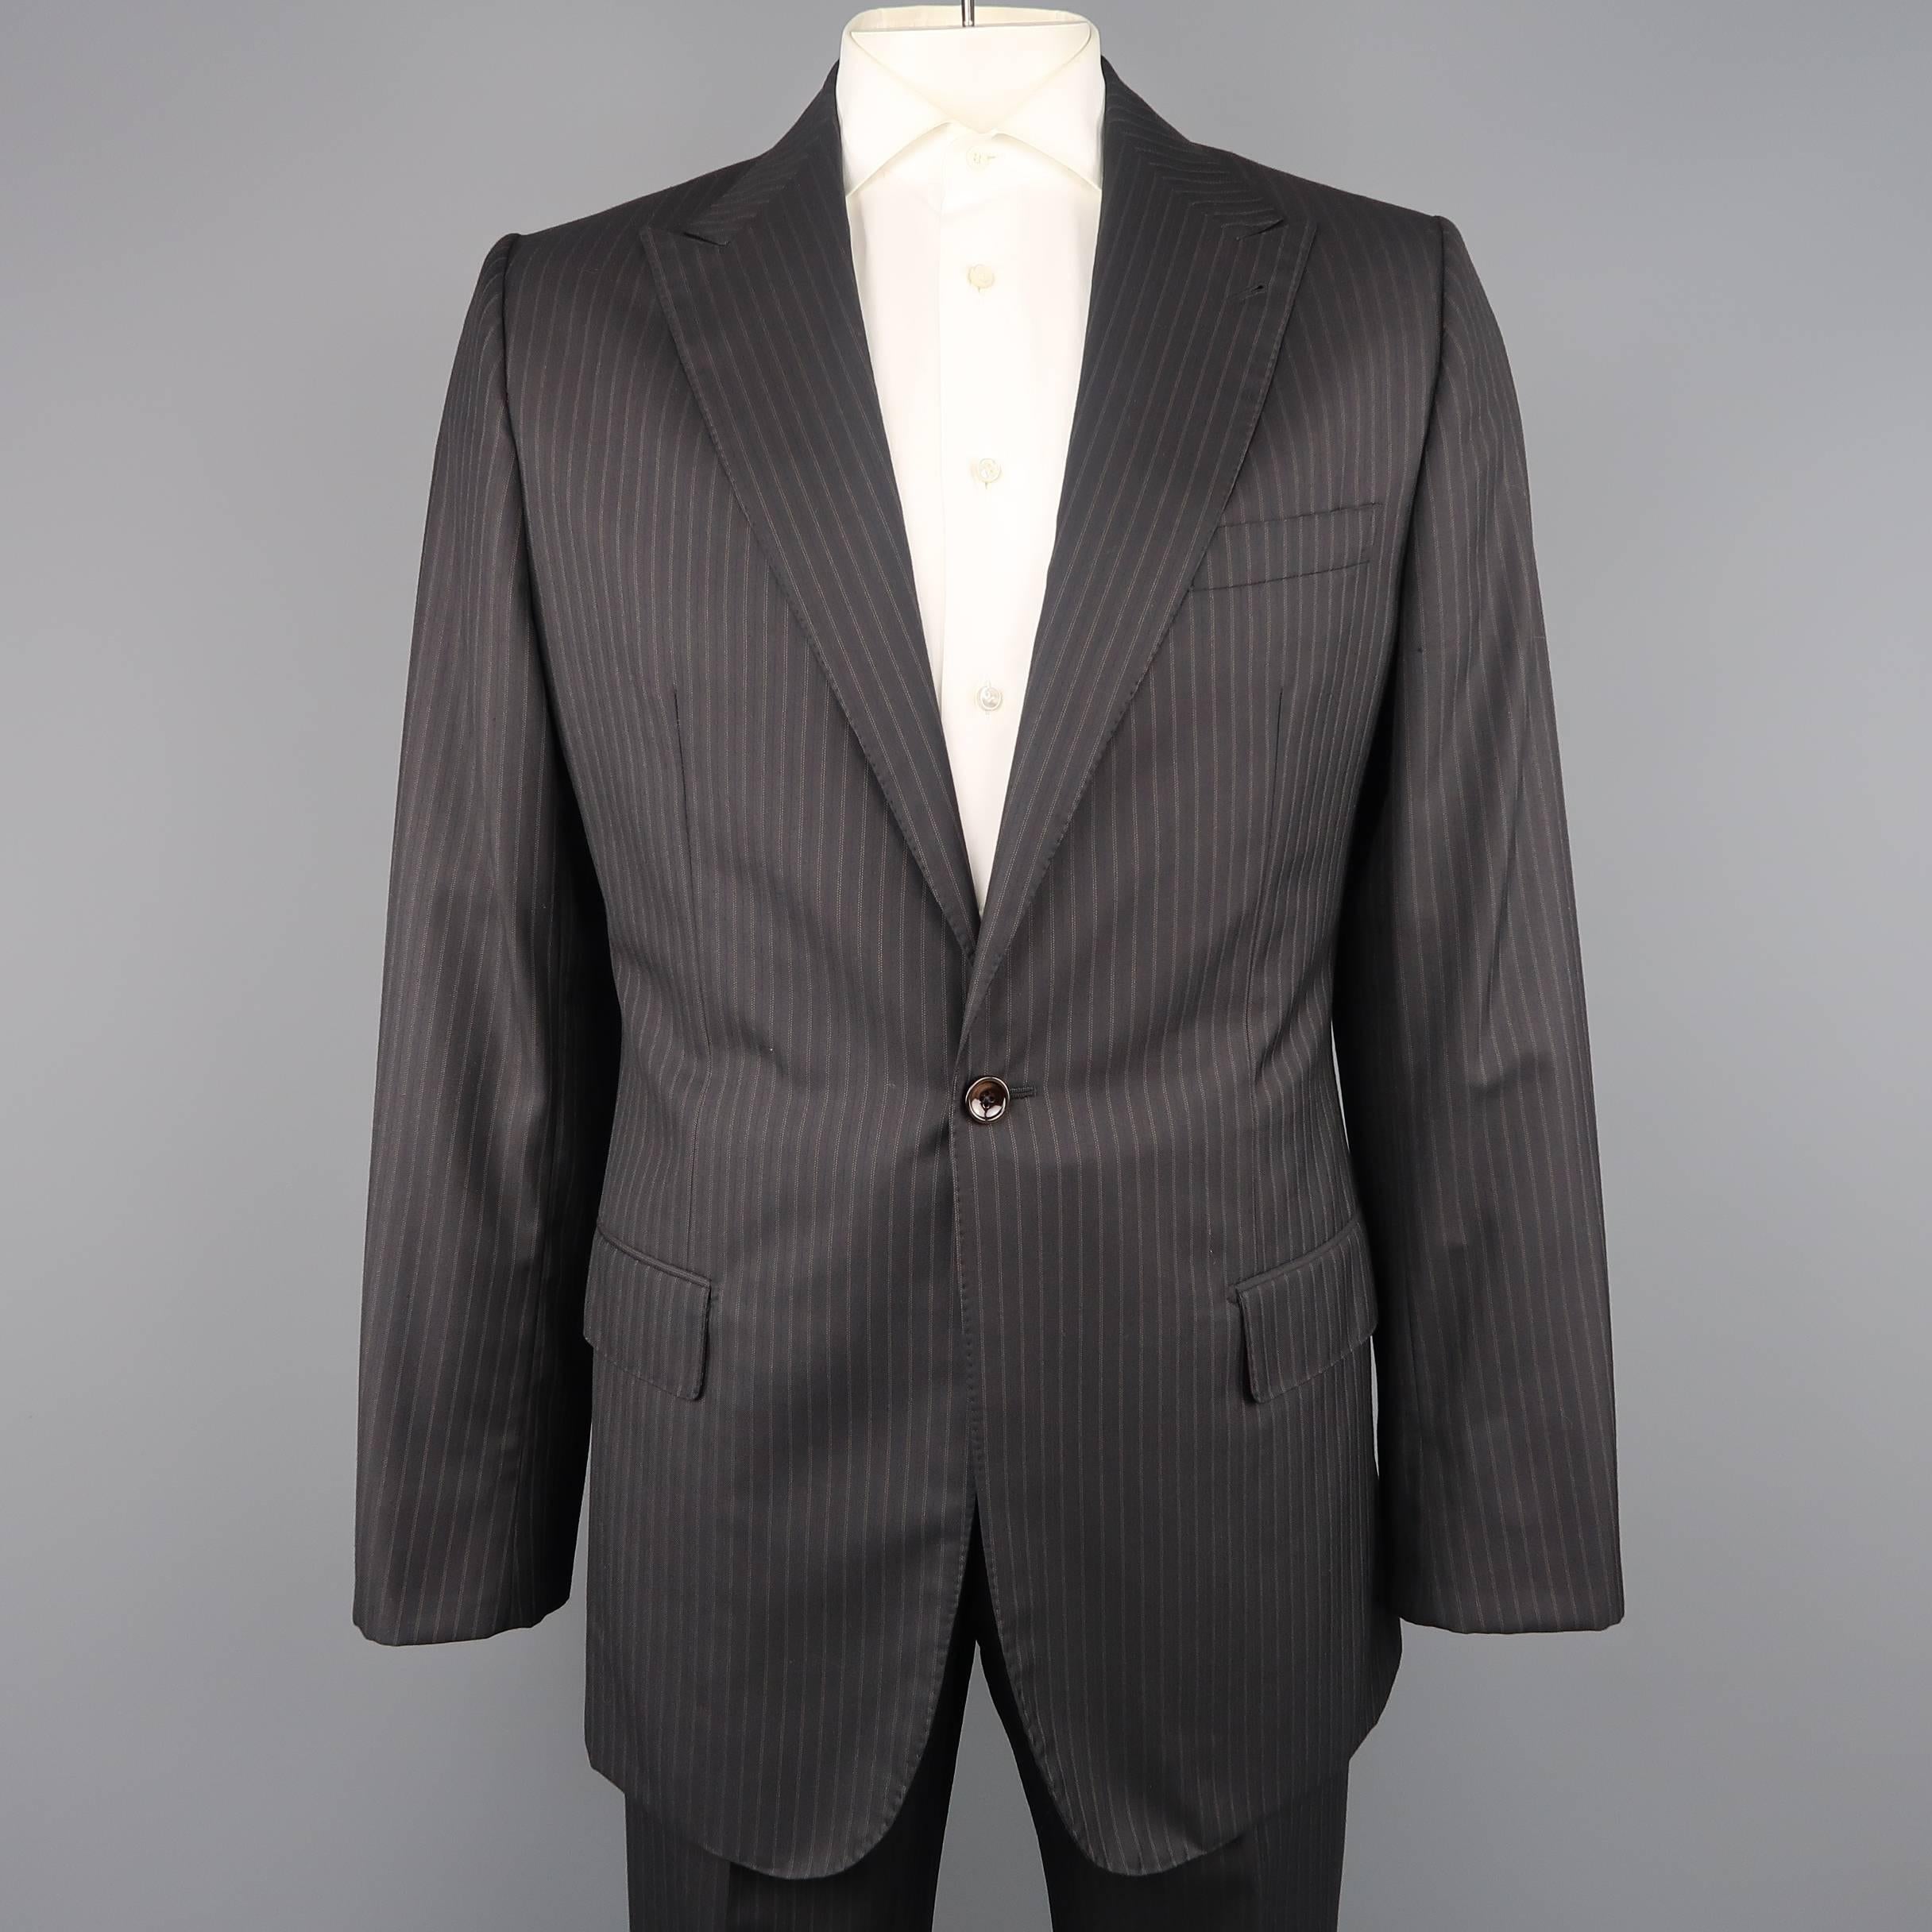 GIORGIO ARMANI suit comes in charcoal micro windowpane print wool and includes a single breasted, two button, notch lapel sport coat and matching flat front trousers.  Custom Made in Italy.
 
Good Pre-Owned Condition.
Marked: IT 52
 
Measurements:
